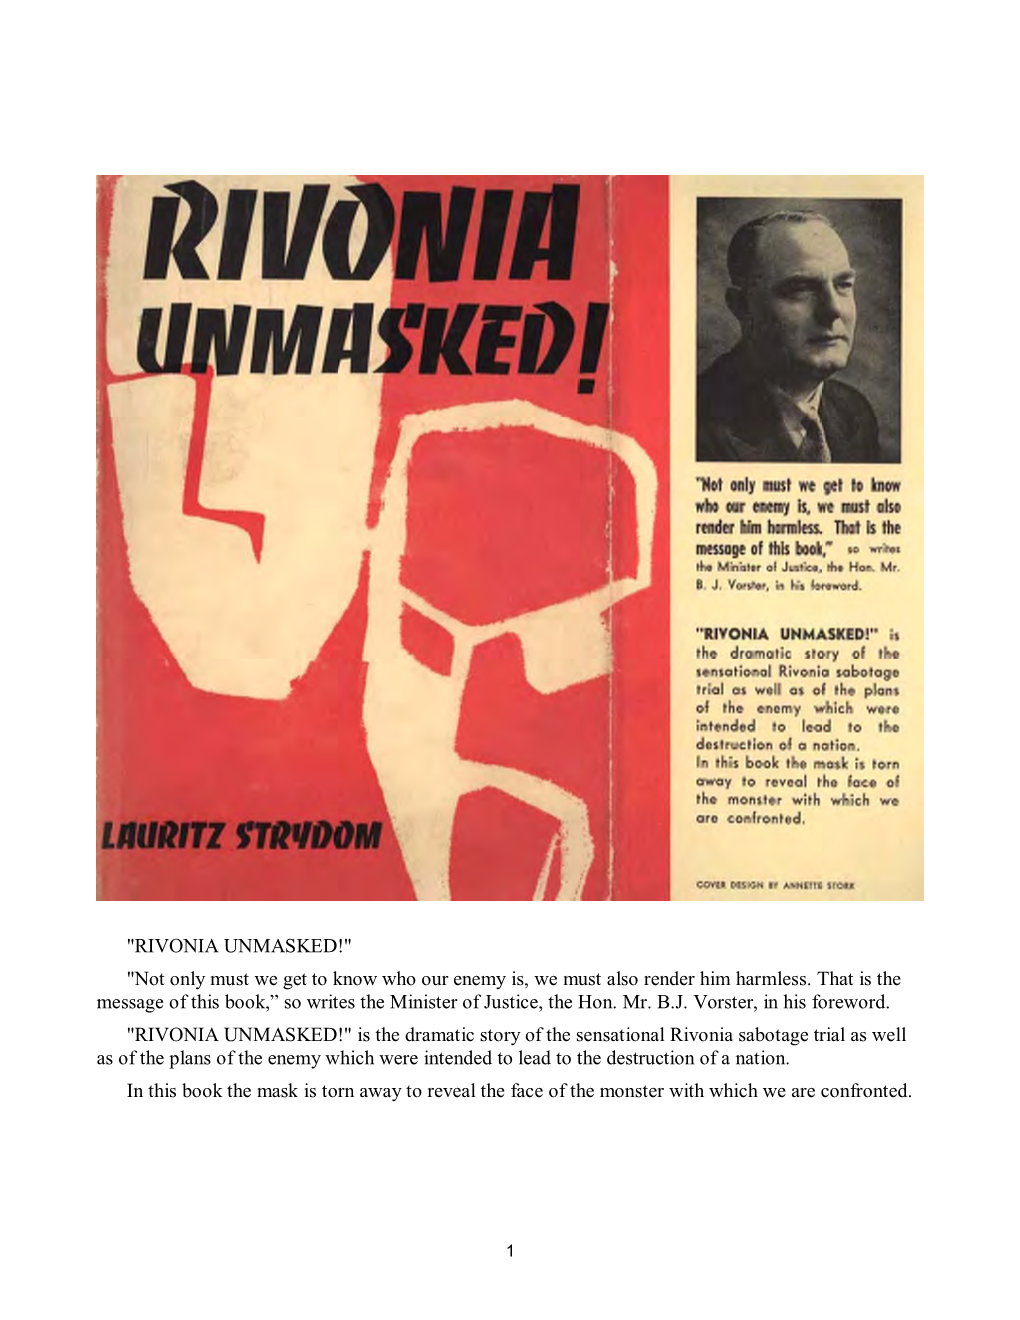 RIVONIA UNMASKED!" "Not Only Must We Get to Know Who Our Enemy Is, We Must Also Render Him Harmless